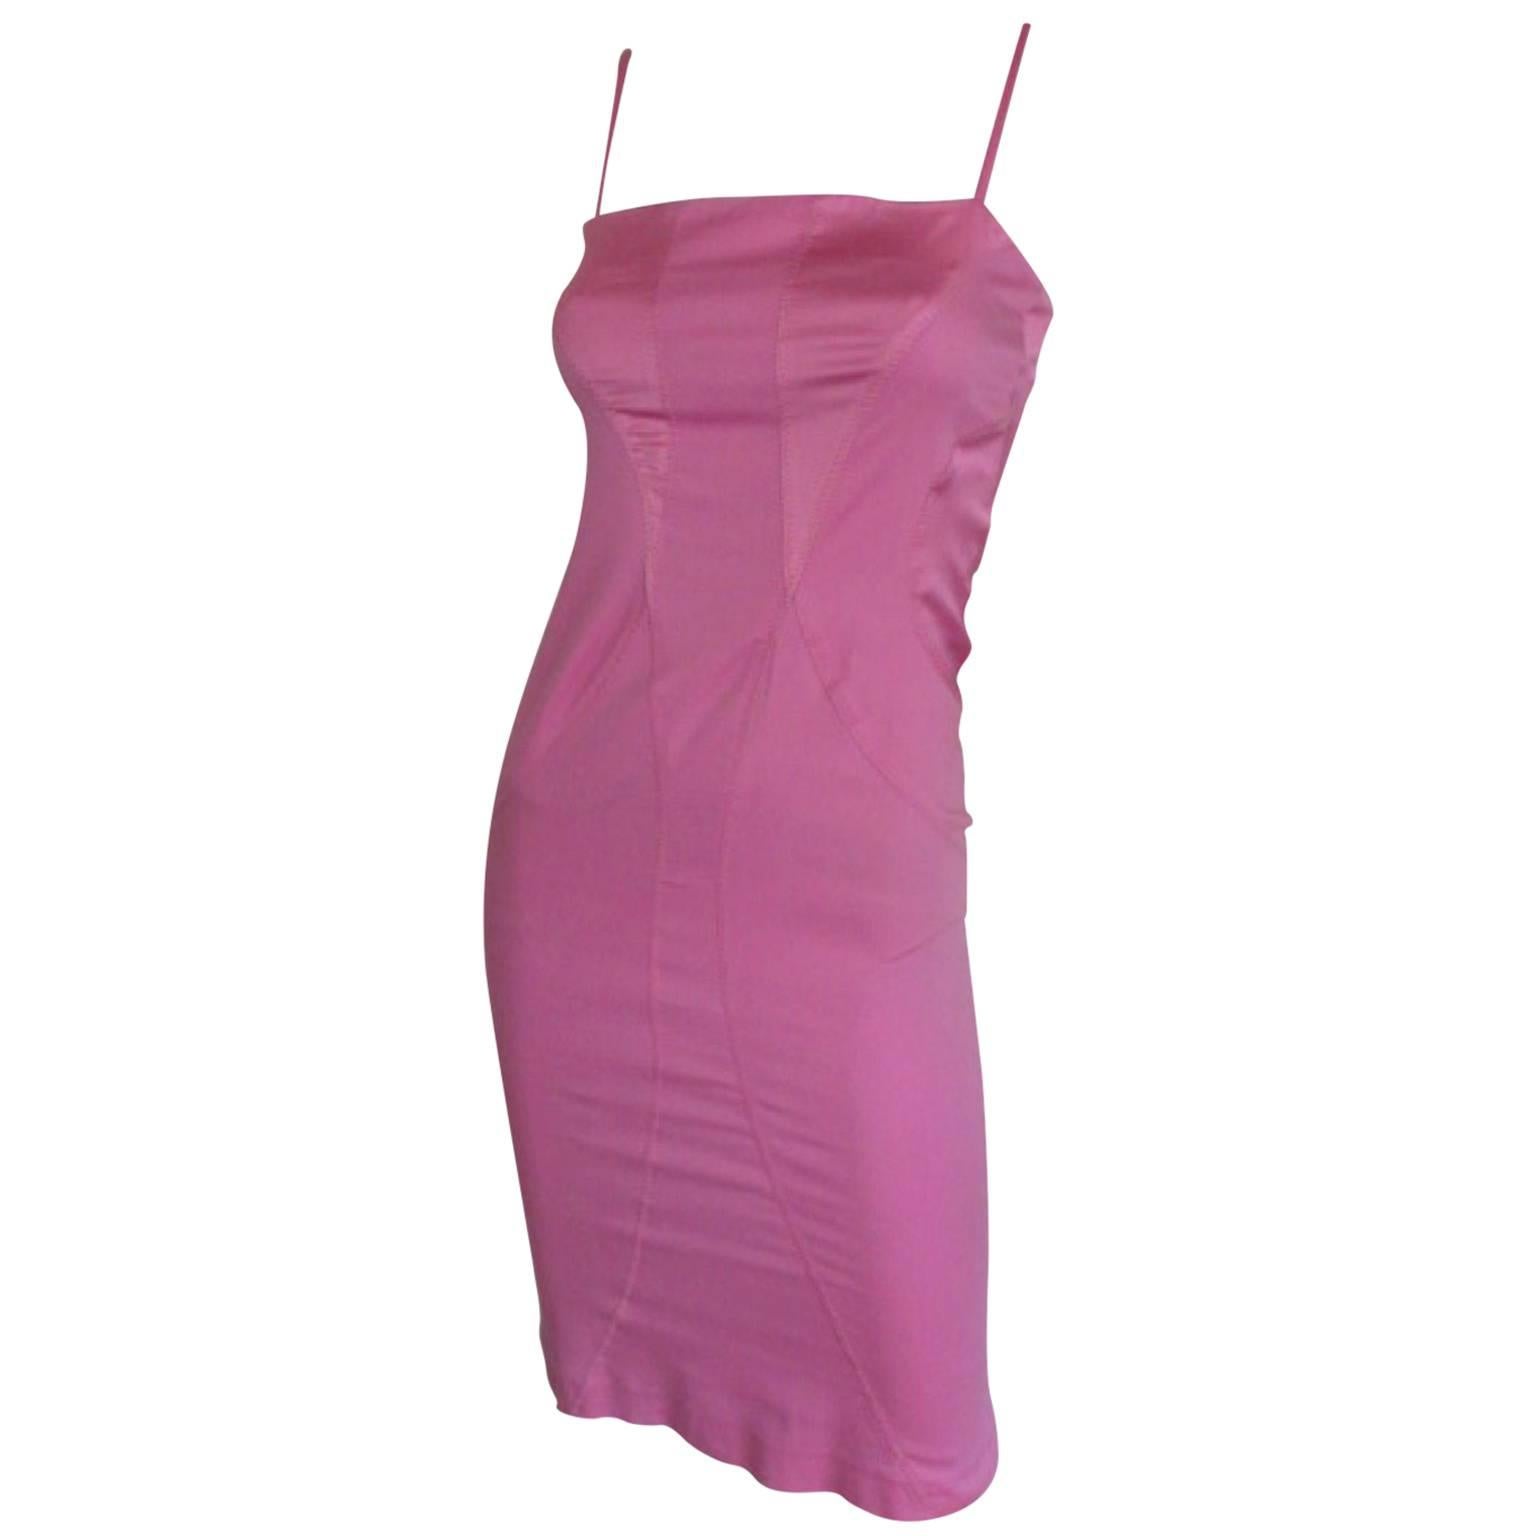 Thierry Mugler Pink Dress For Sale